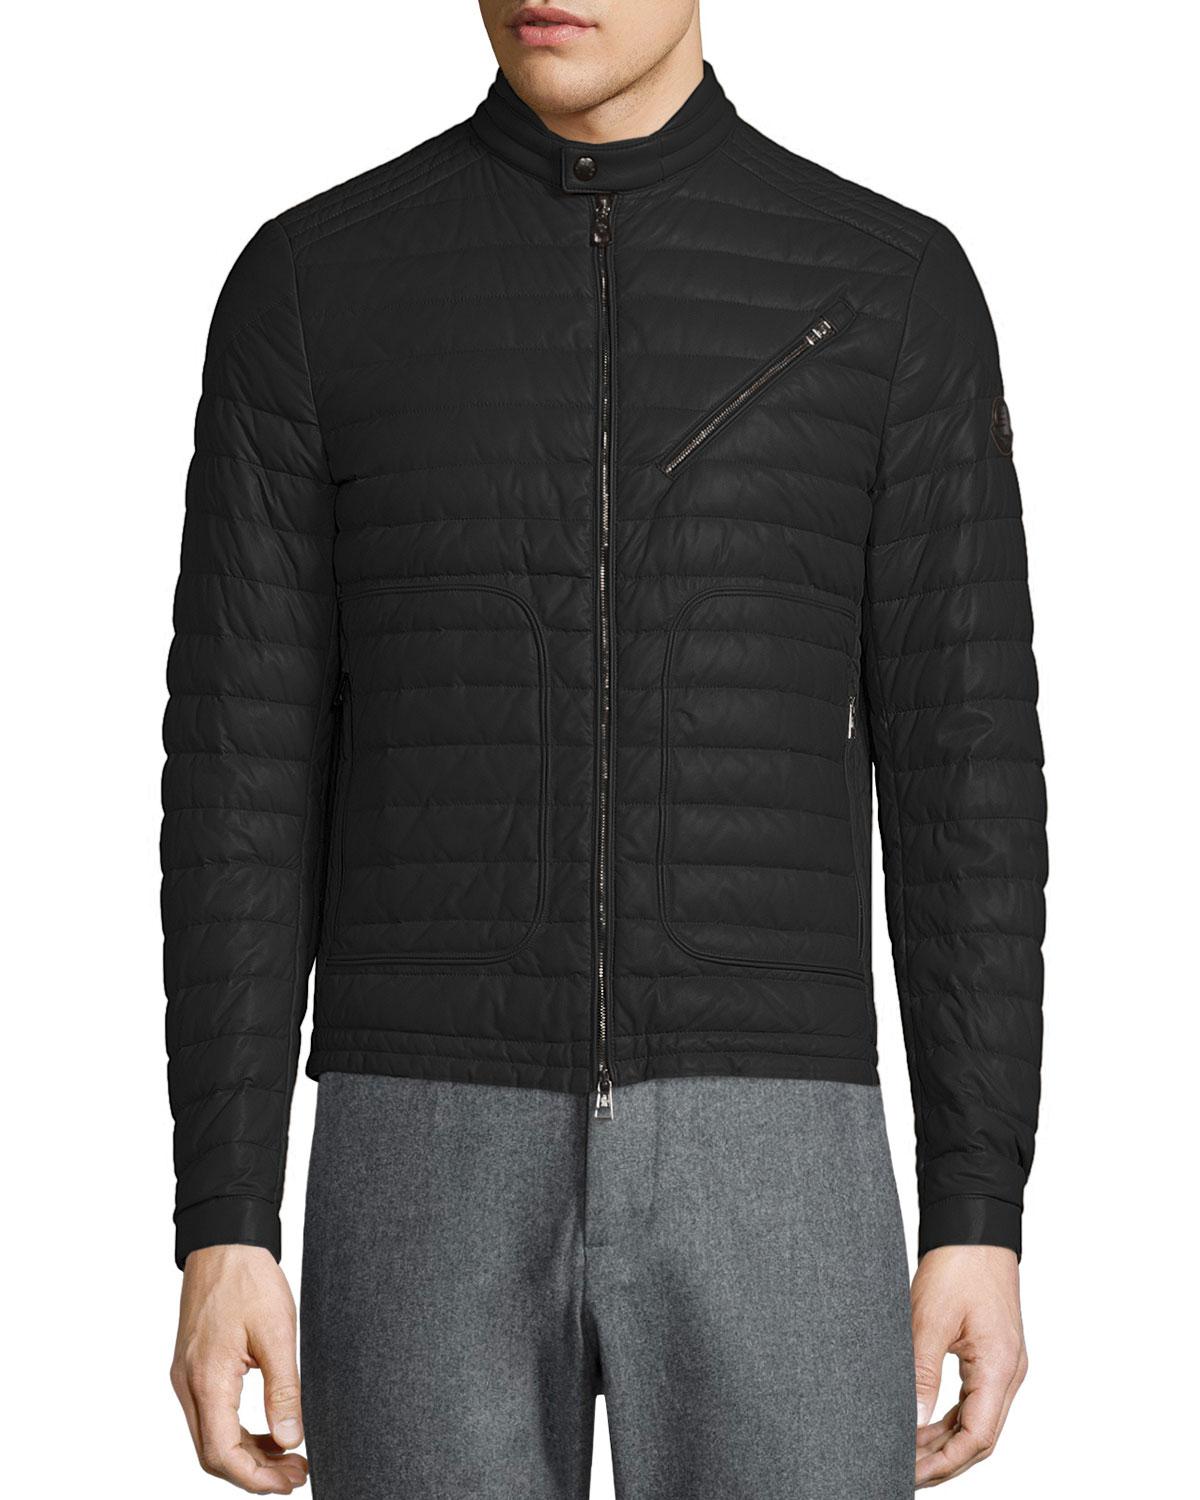 Moncler Casteu Quilted Leather Moto Jacket in Black for Men - Lyst